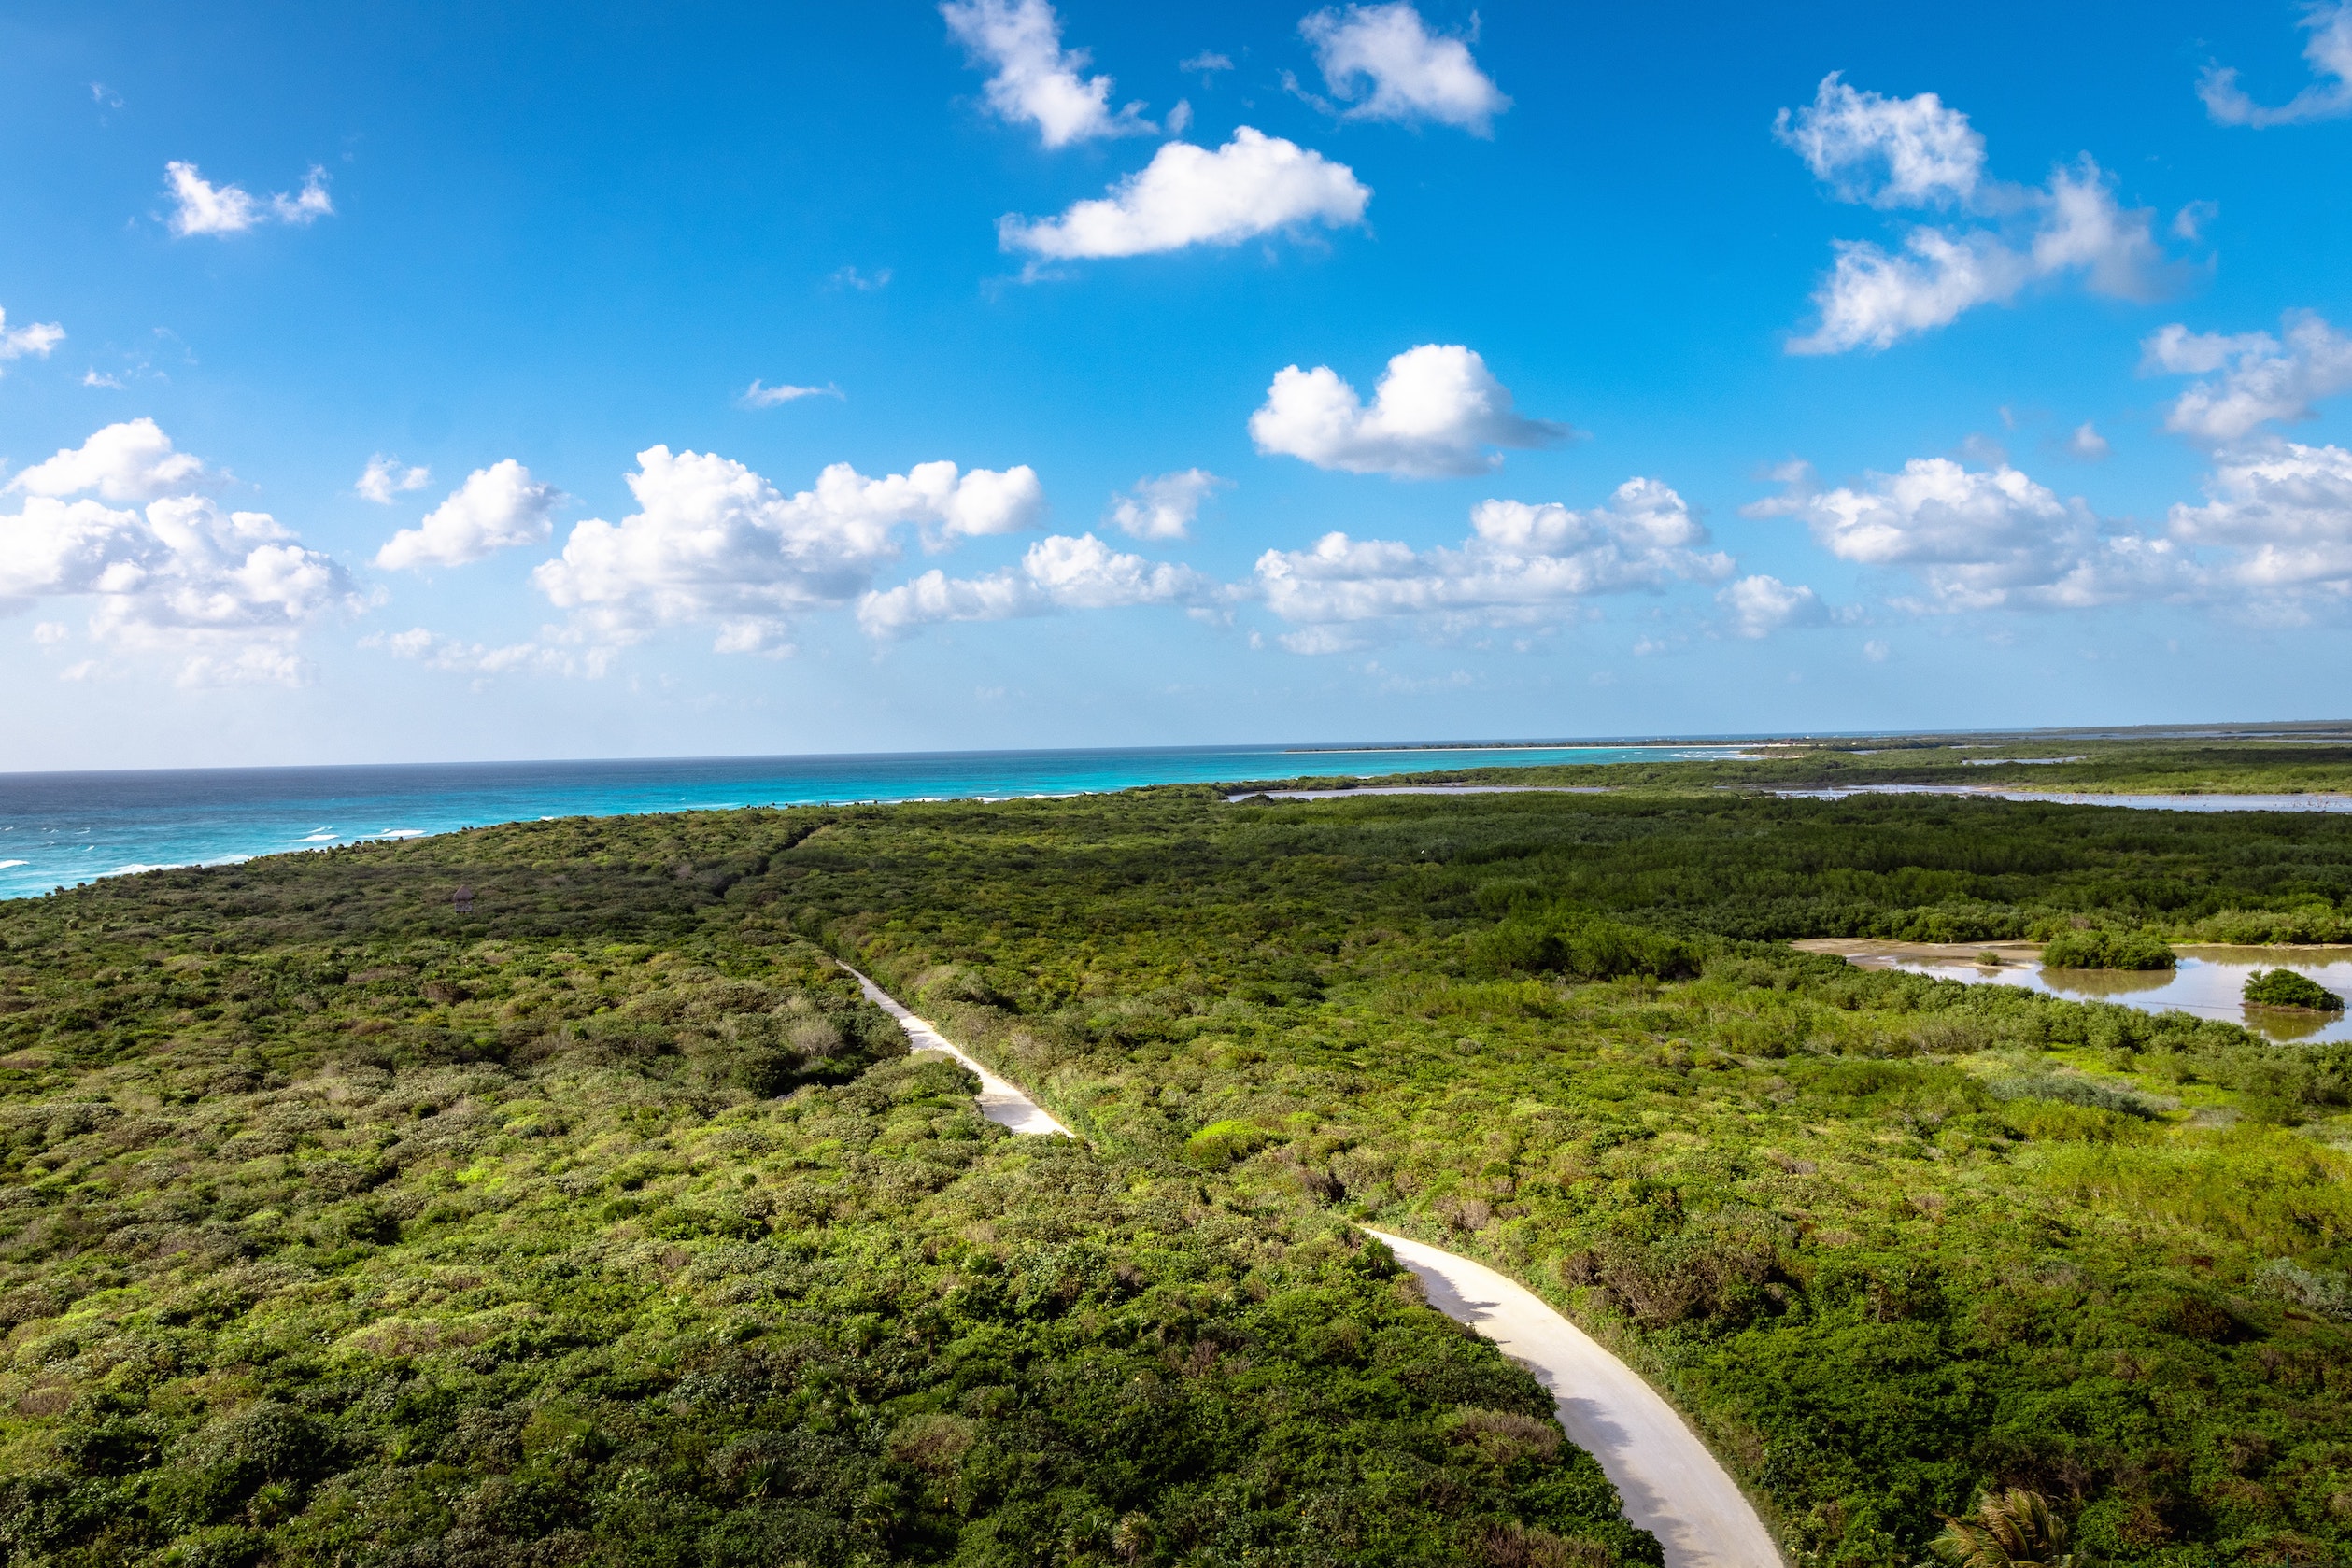 Cozumel is a nature lovers' paradise